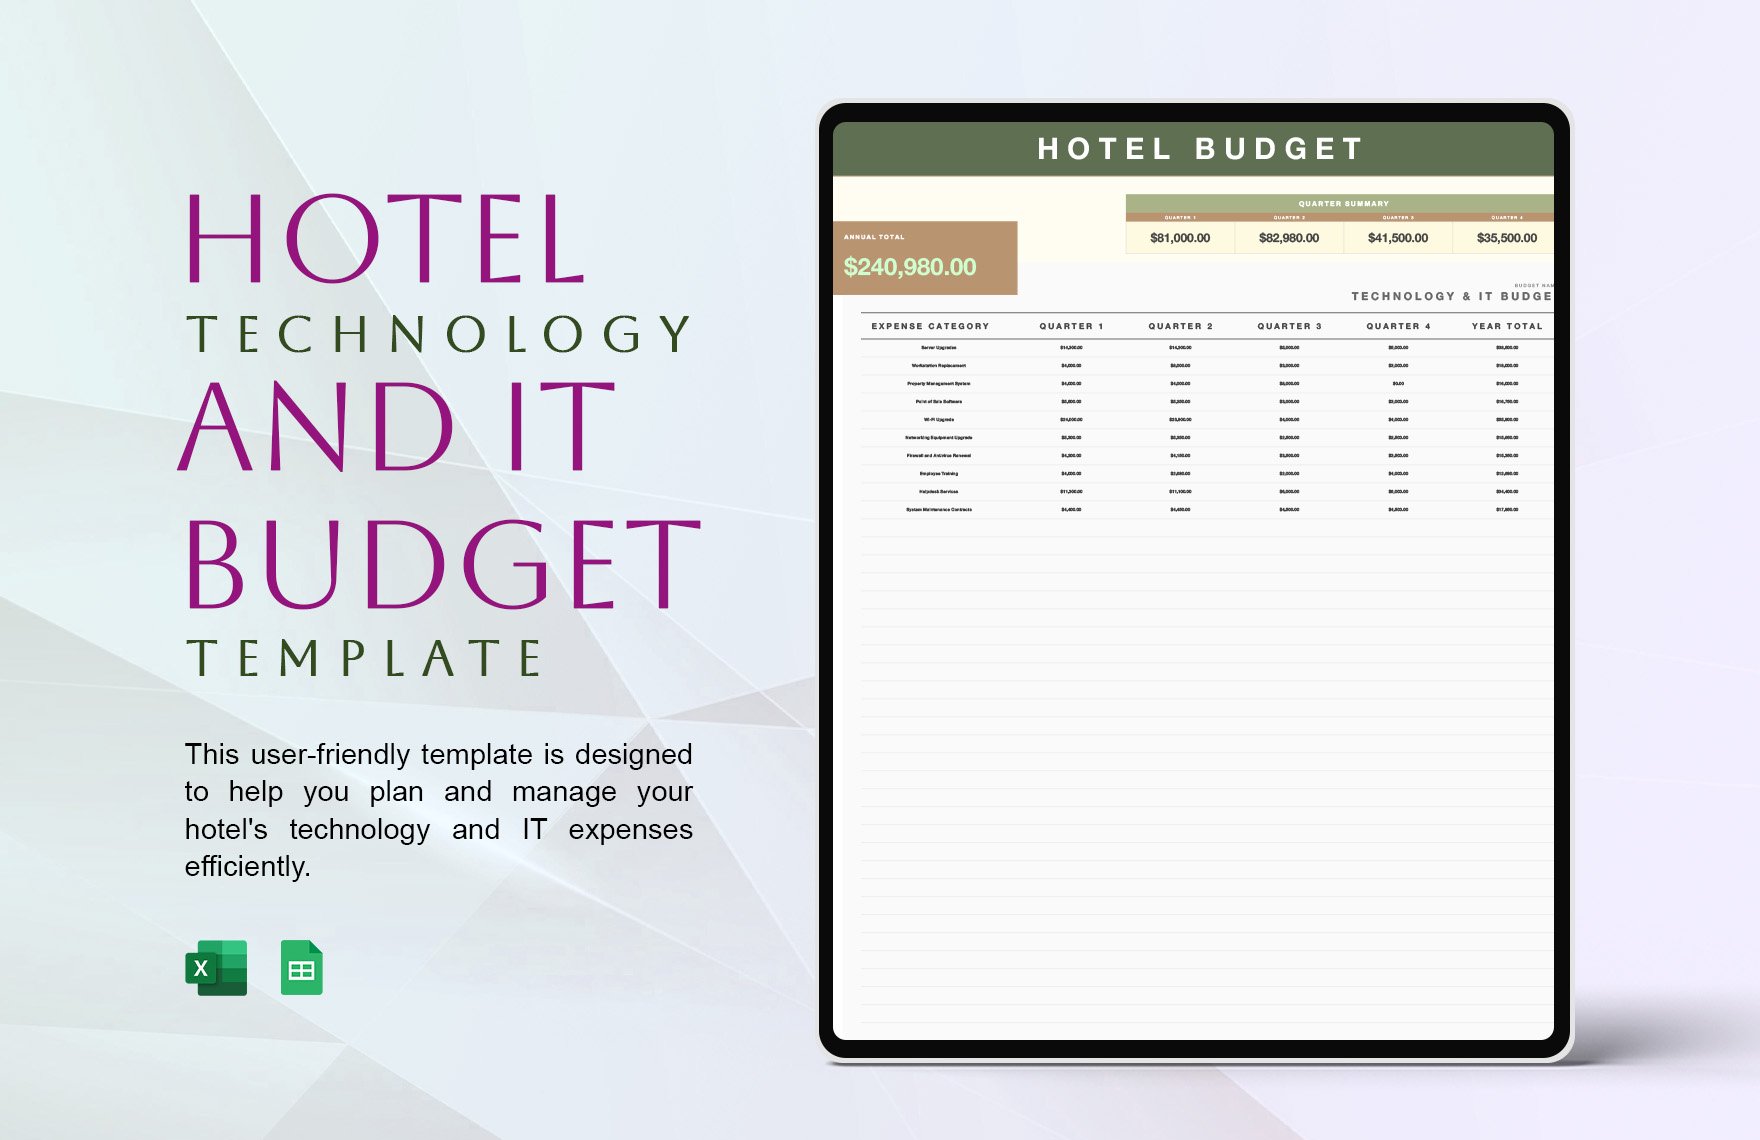 Hotel Technology and IT Budget Template